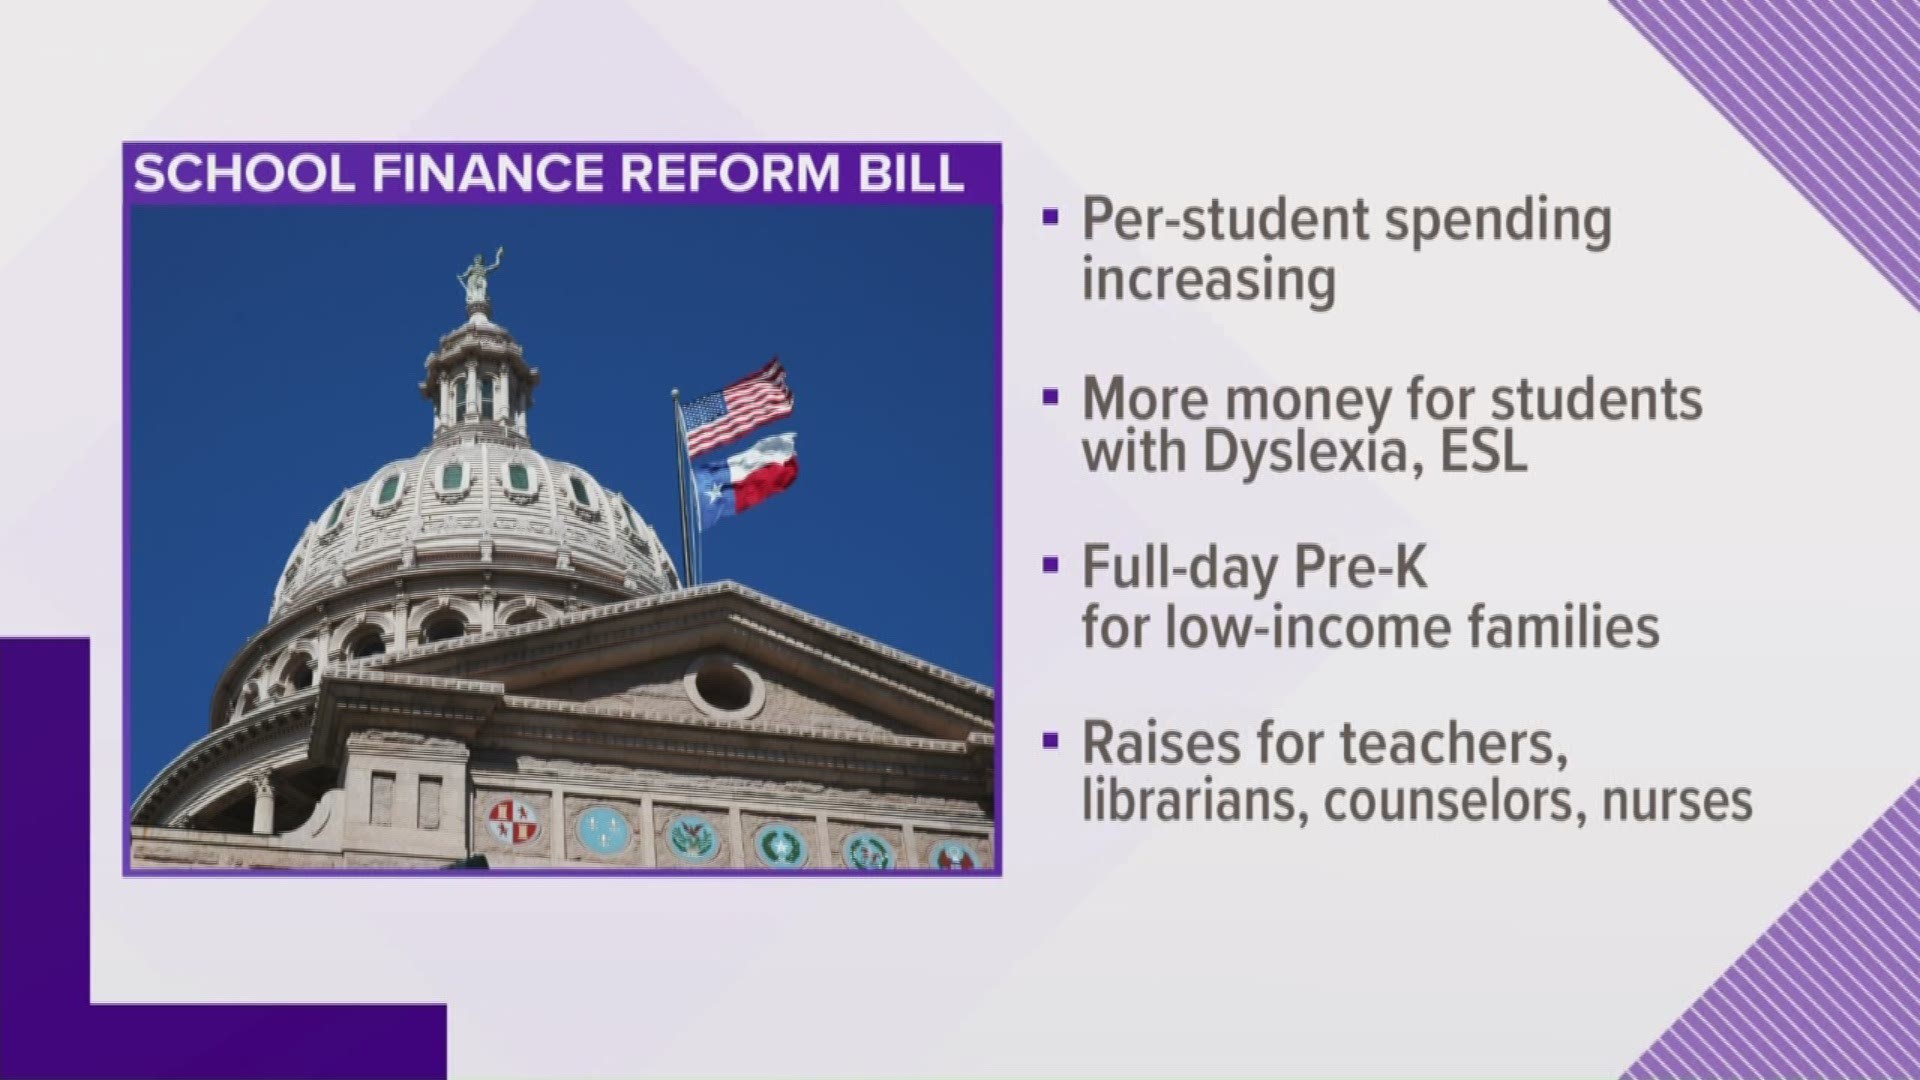 Austin ISD leaders are still trying to figure out how the school finance reform bill state lawmakers passed in May will impact their budget.